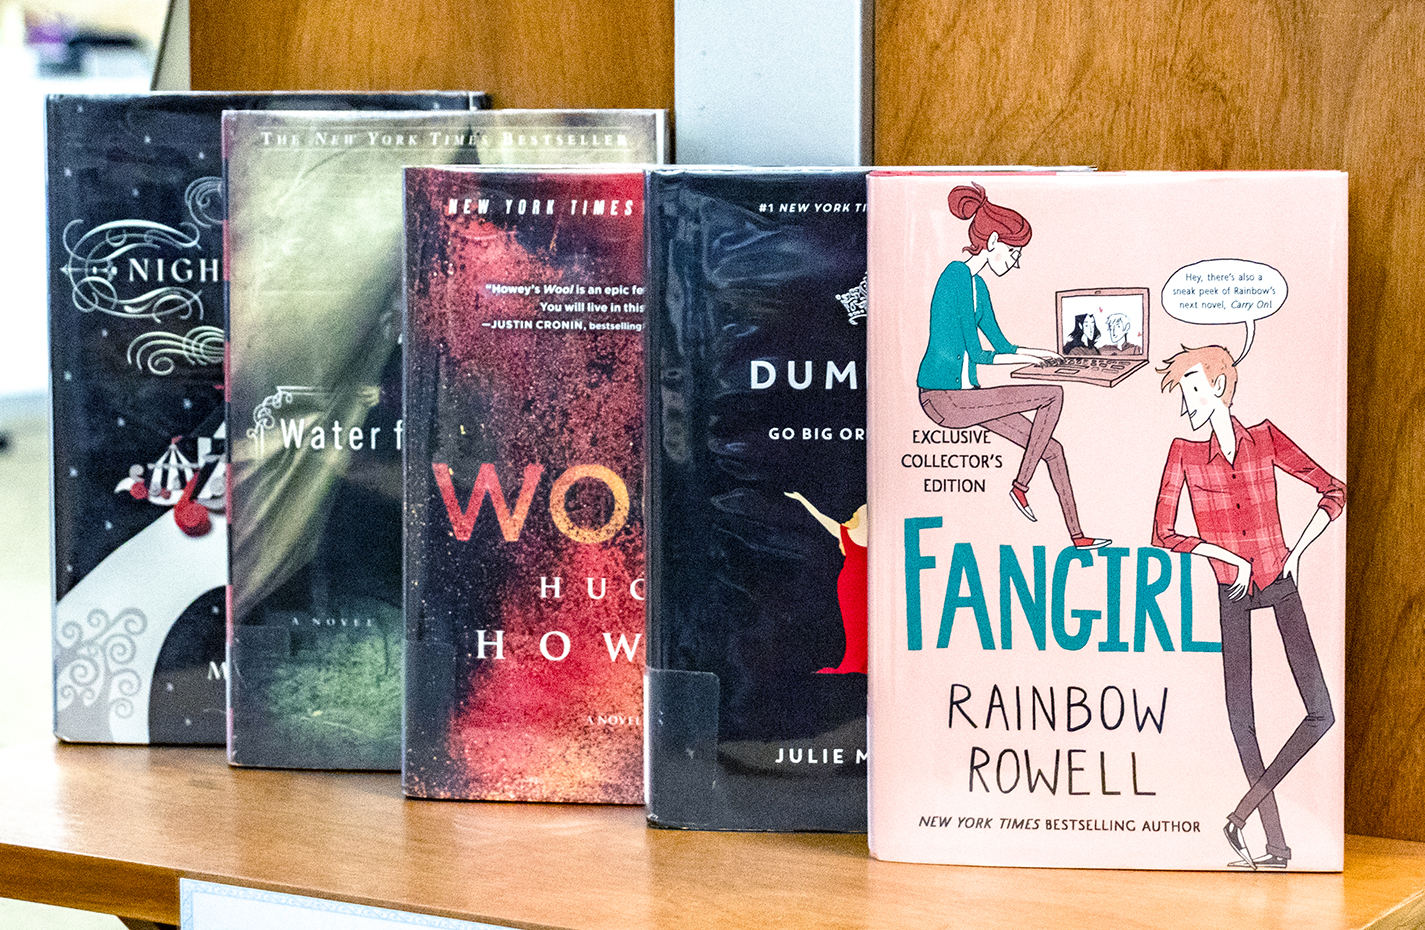 The J. Ardis Bell Library on NE Campus will have a book display about writing different genres of fiction that will include books they have on hand of past National Novel Writing Month participants.